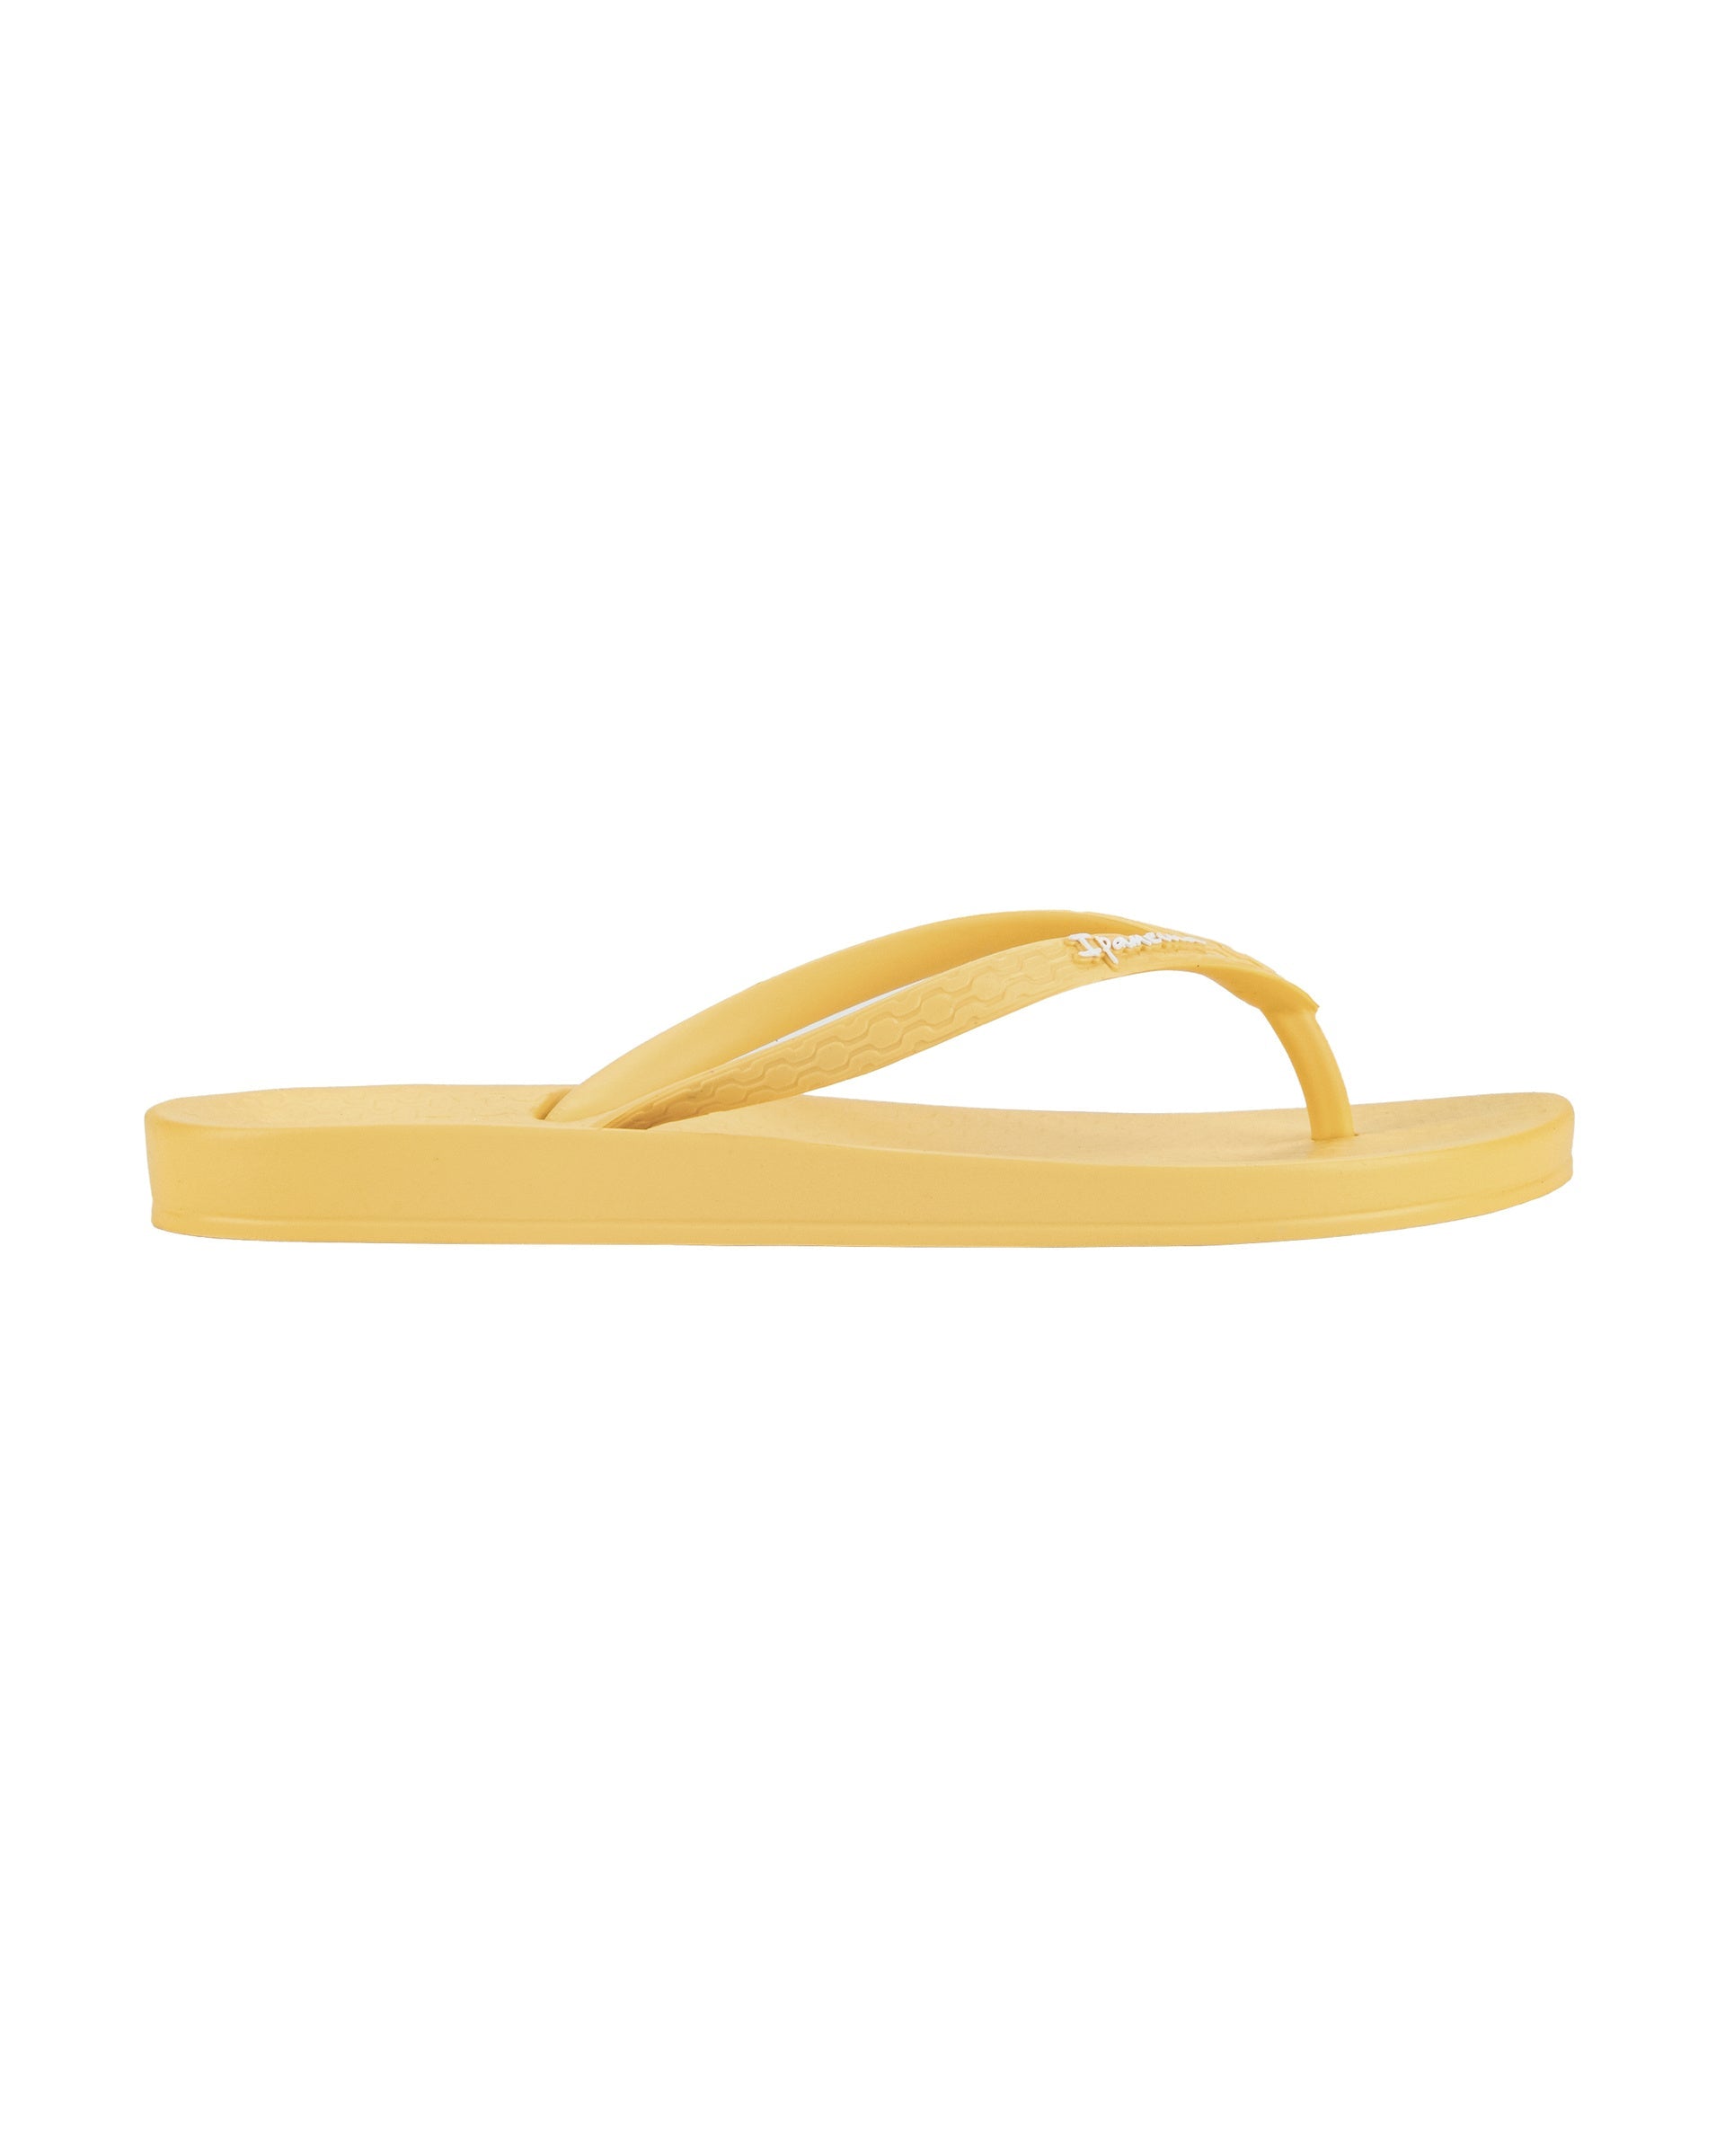 Outer side view of a yellow Ipanema Ana Colors women's flip flop.